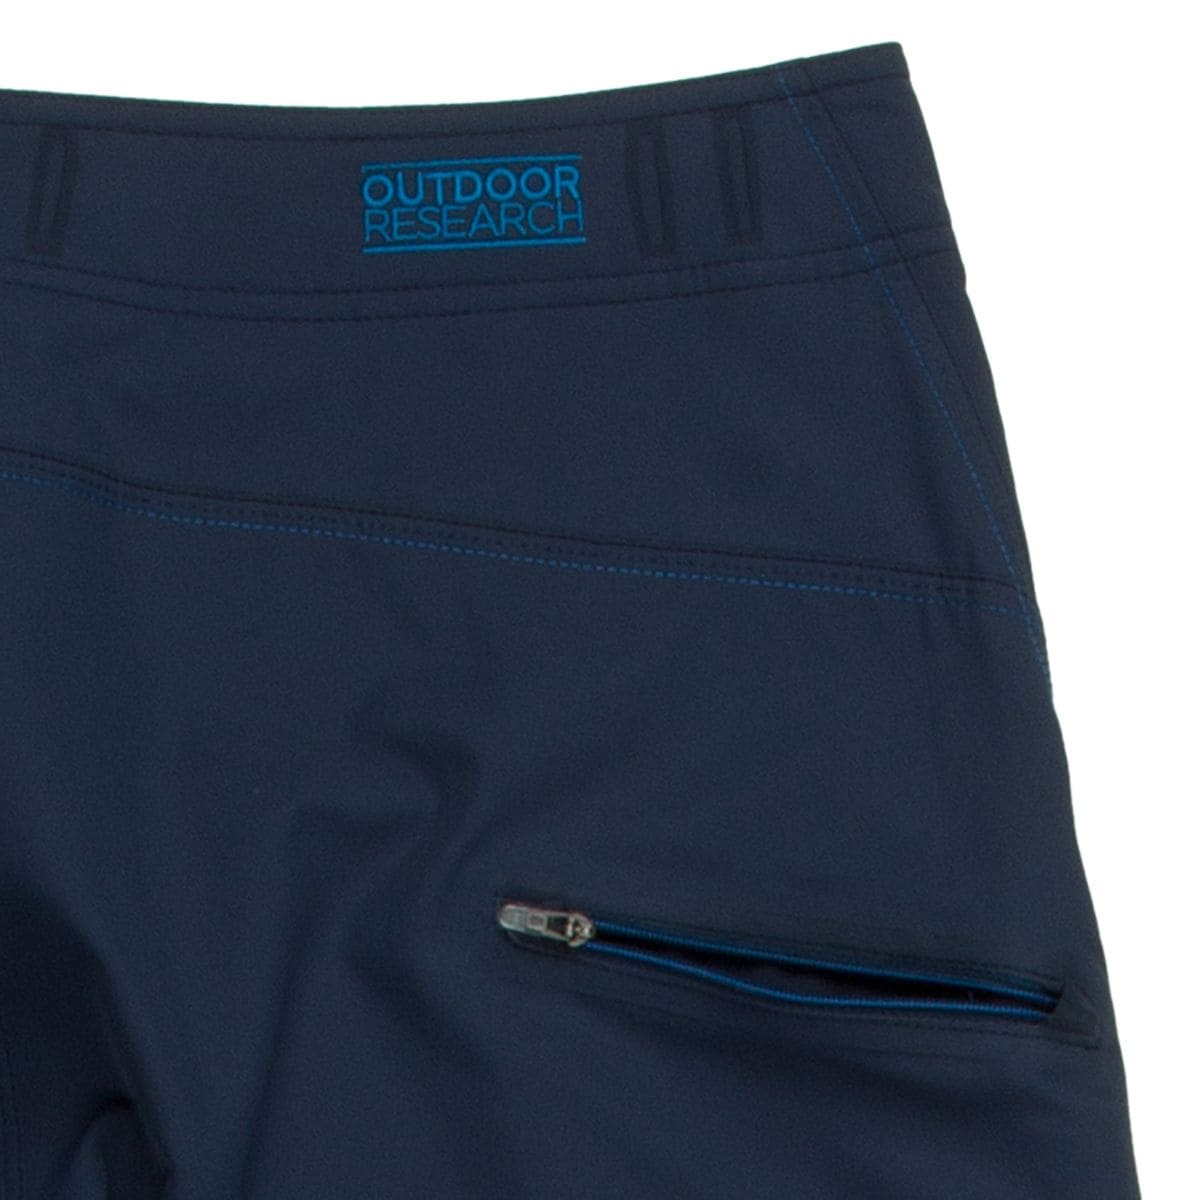 Outdoor Research Backcountry Board Short - Men's - Clothing